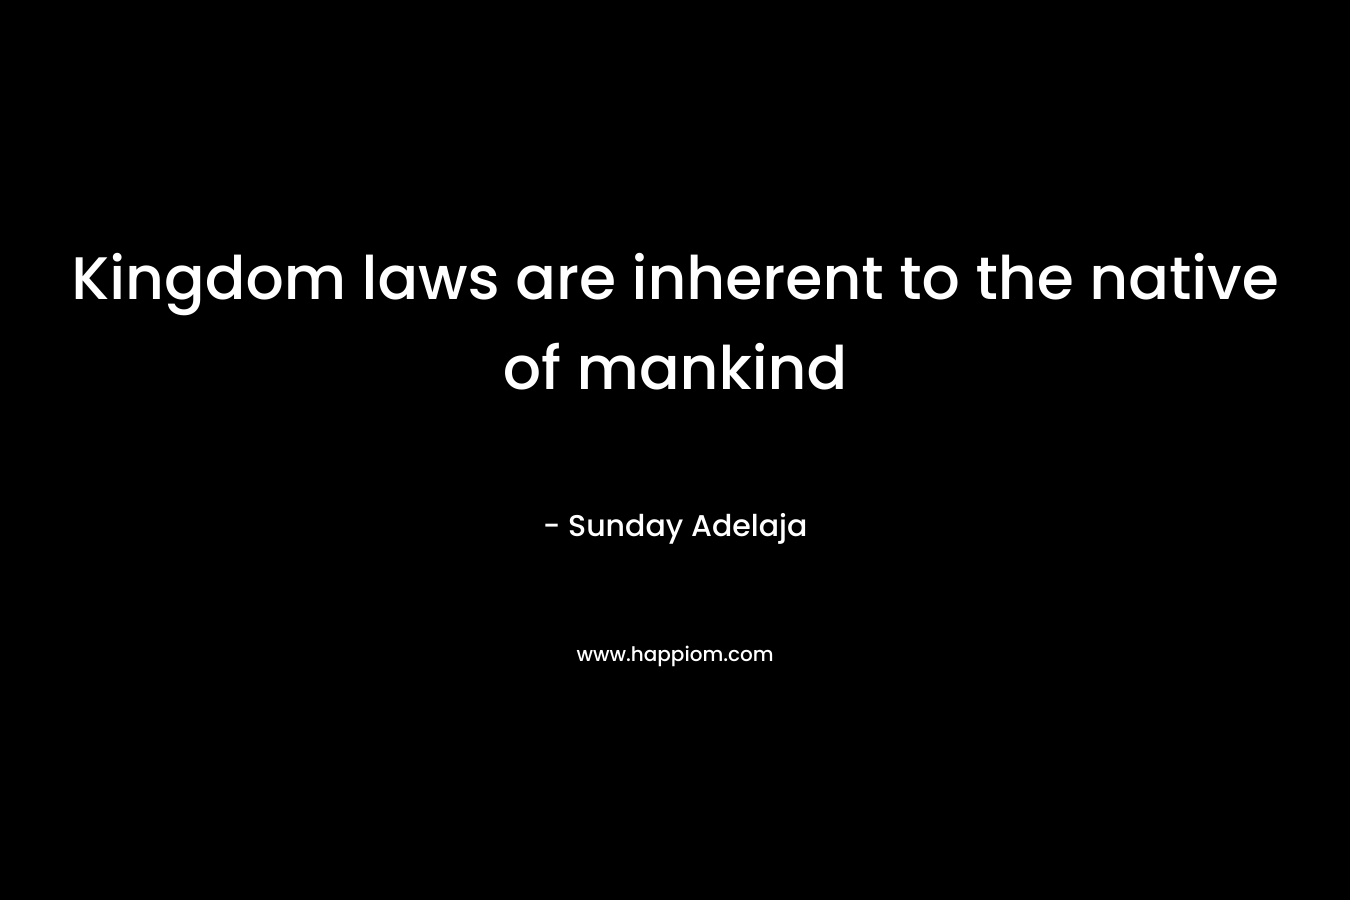 Kingdom laws are inherent to the native of mankind